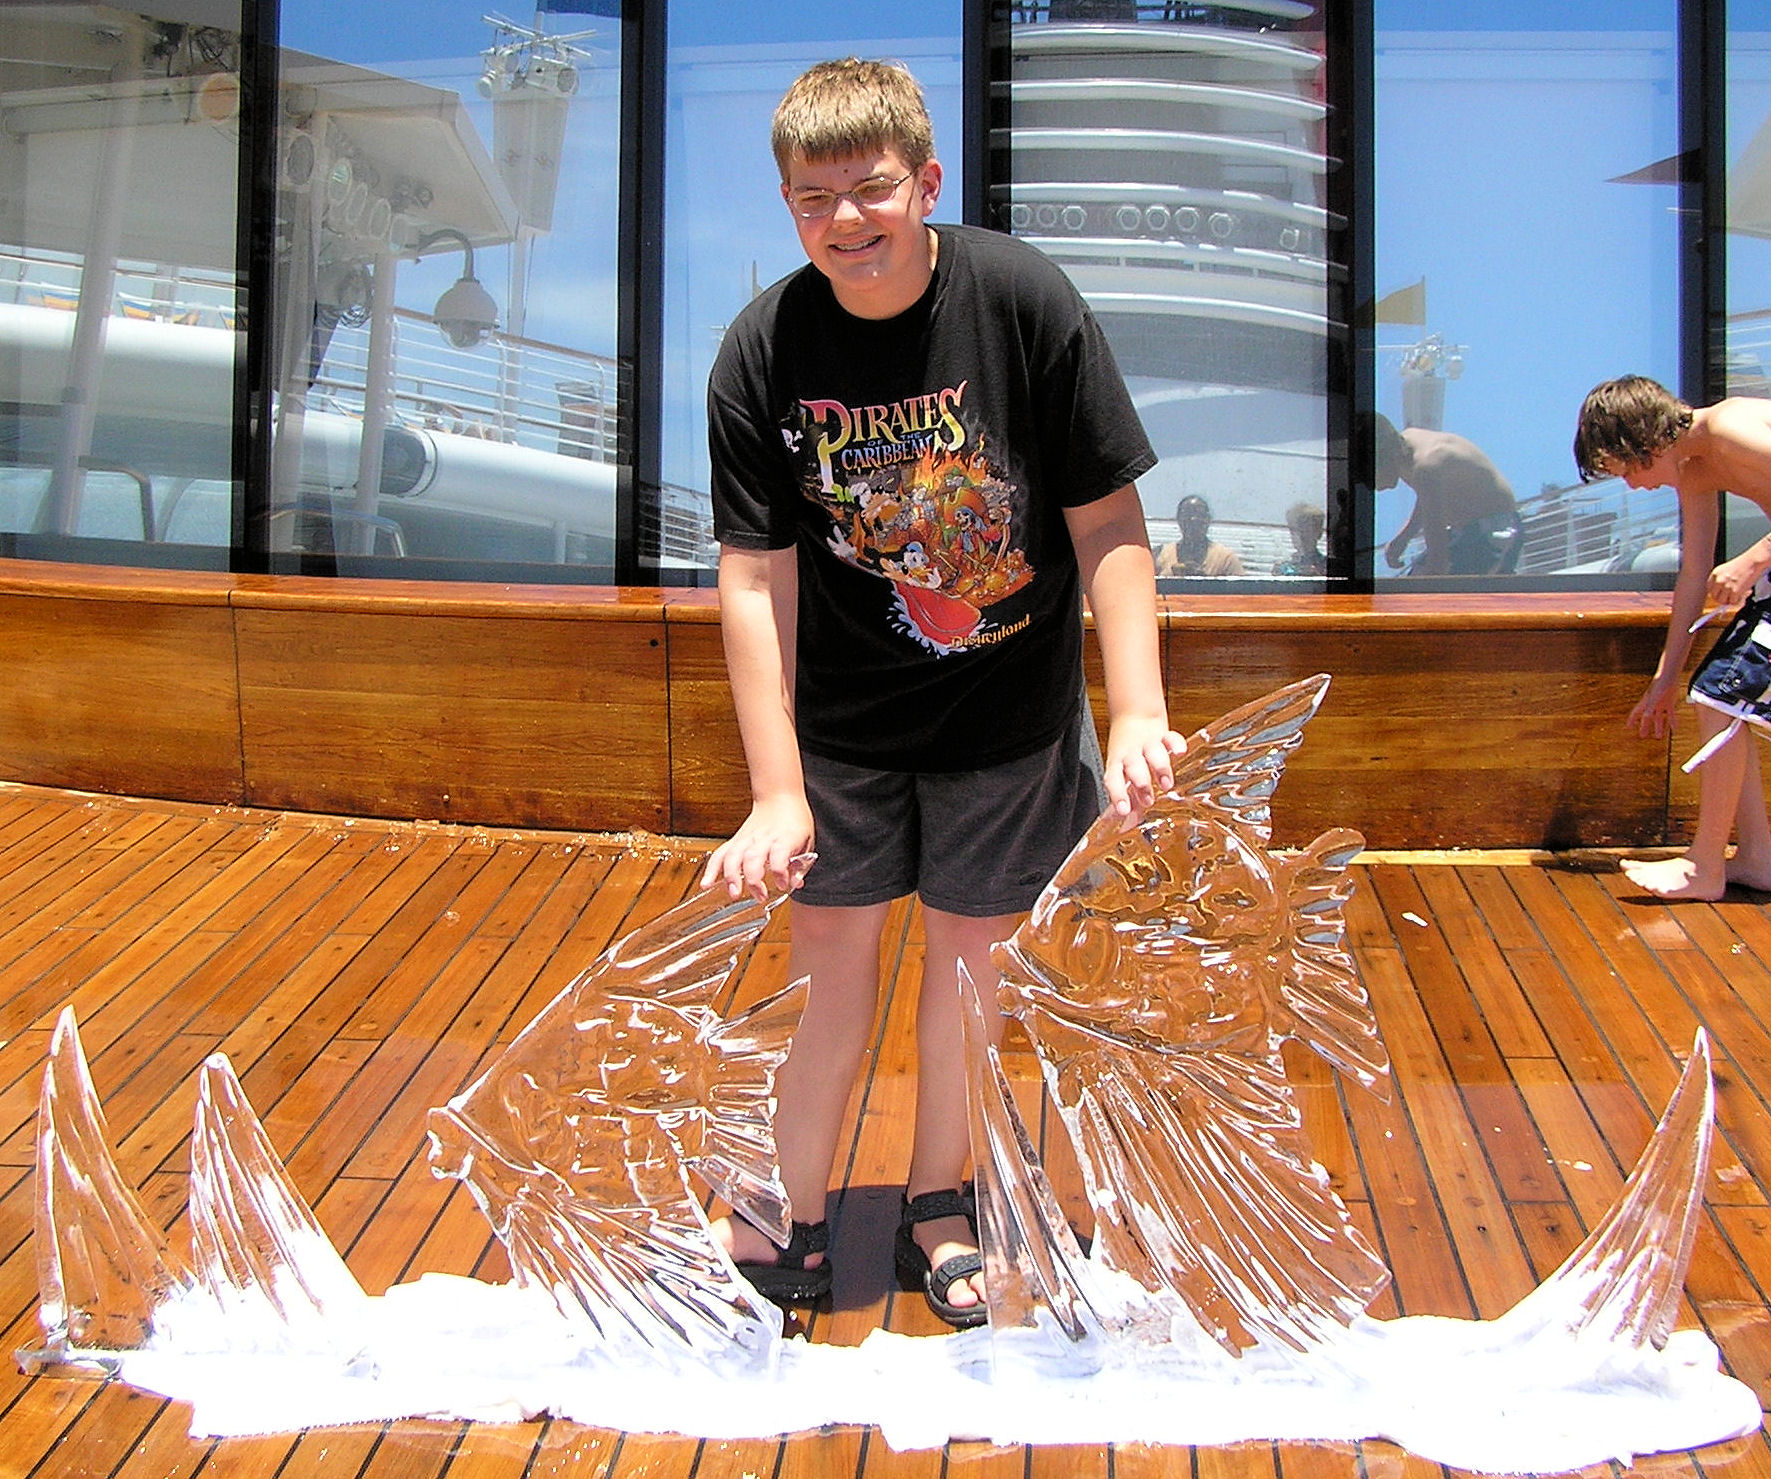 An ice sculpture on the Disney Cruise Line that I saw being made.